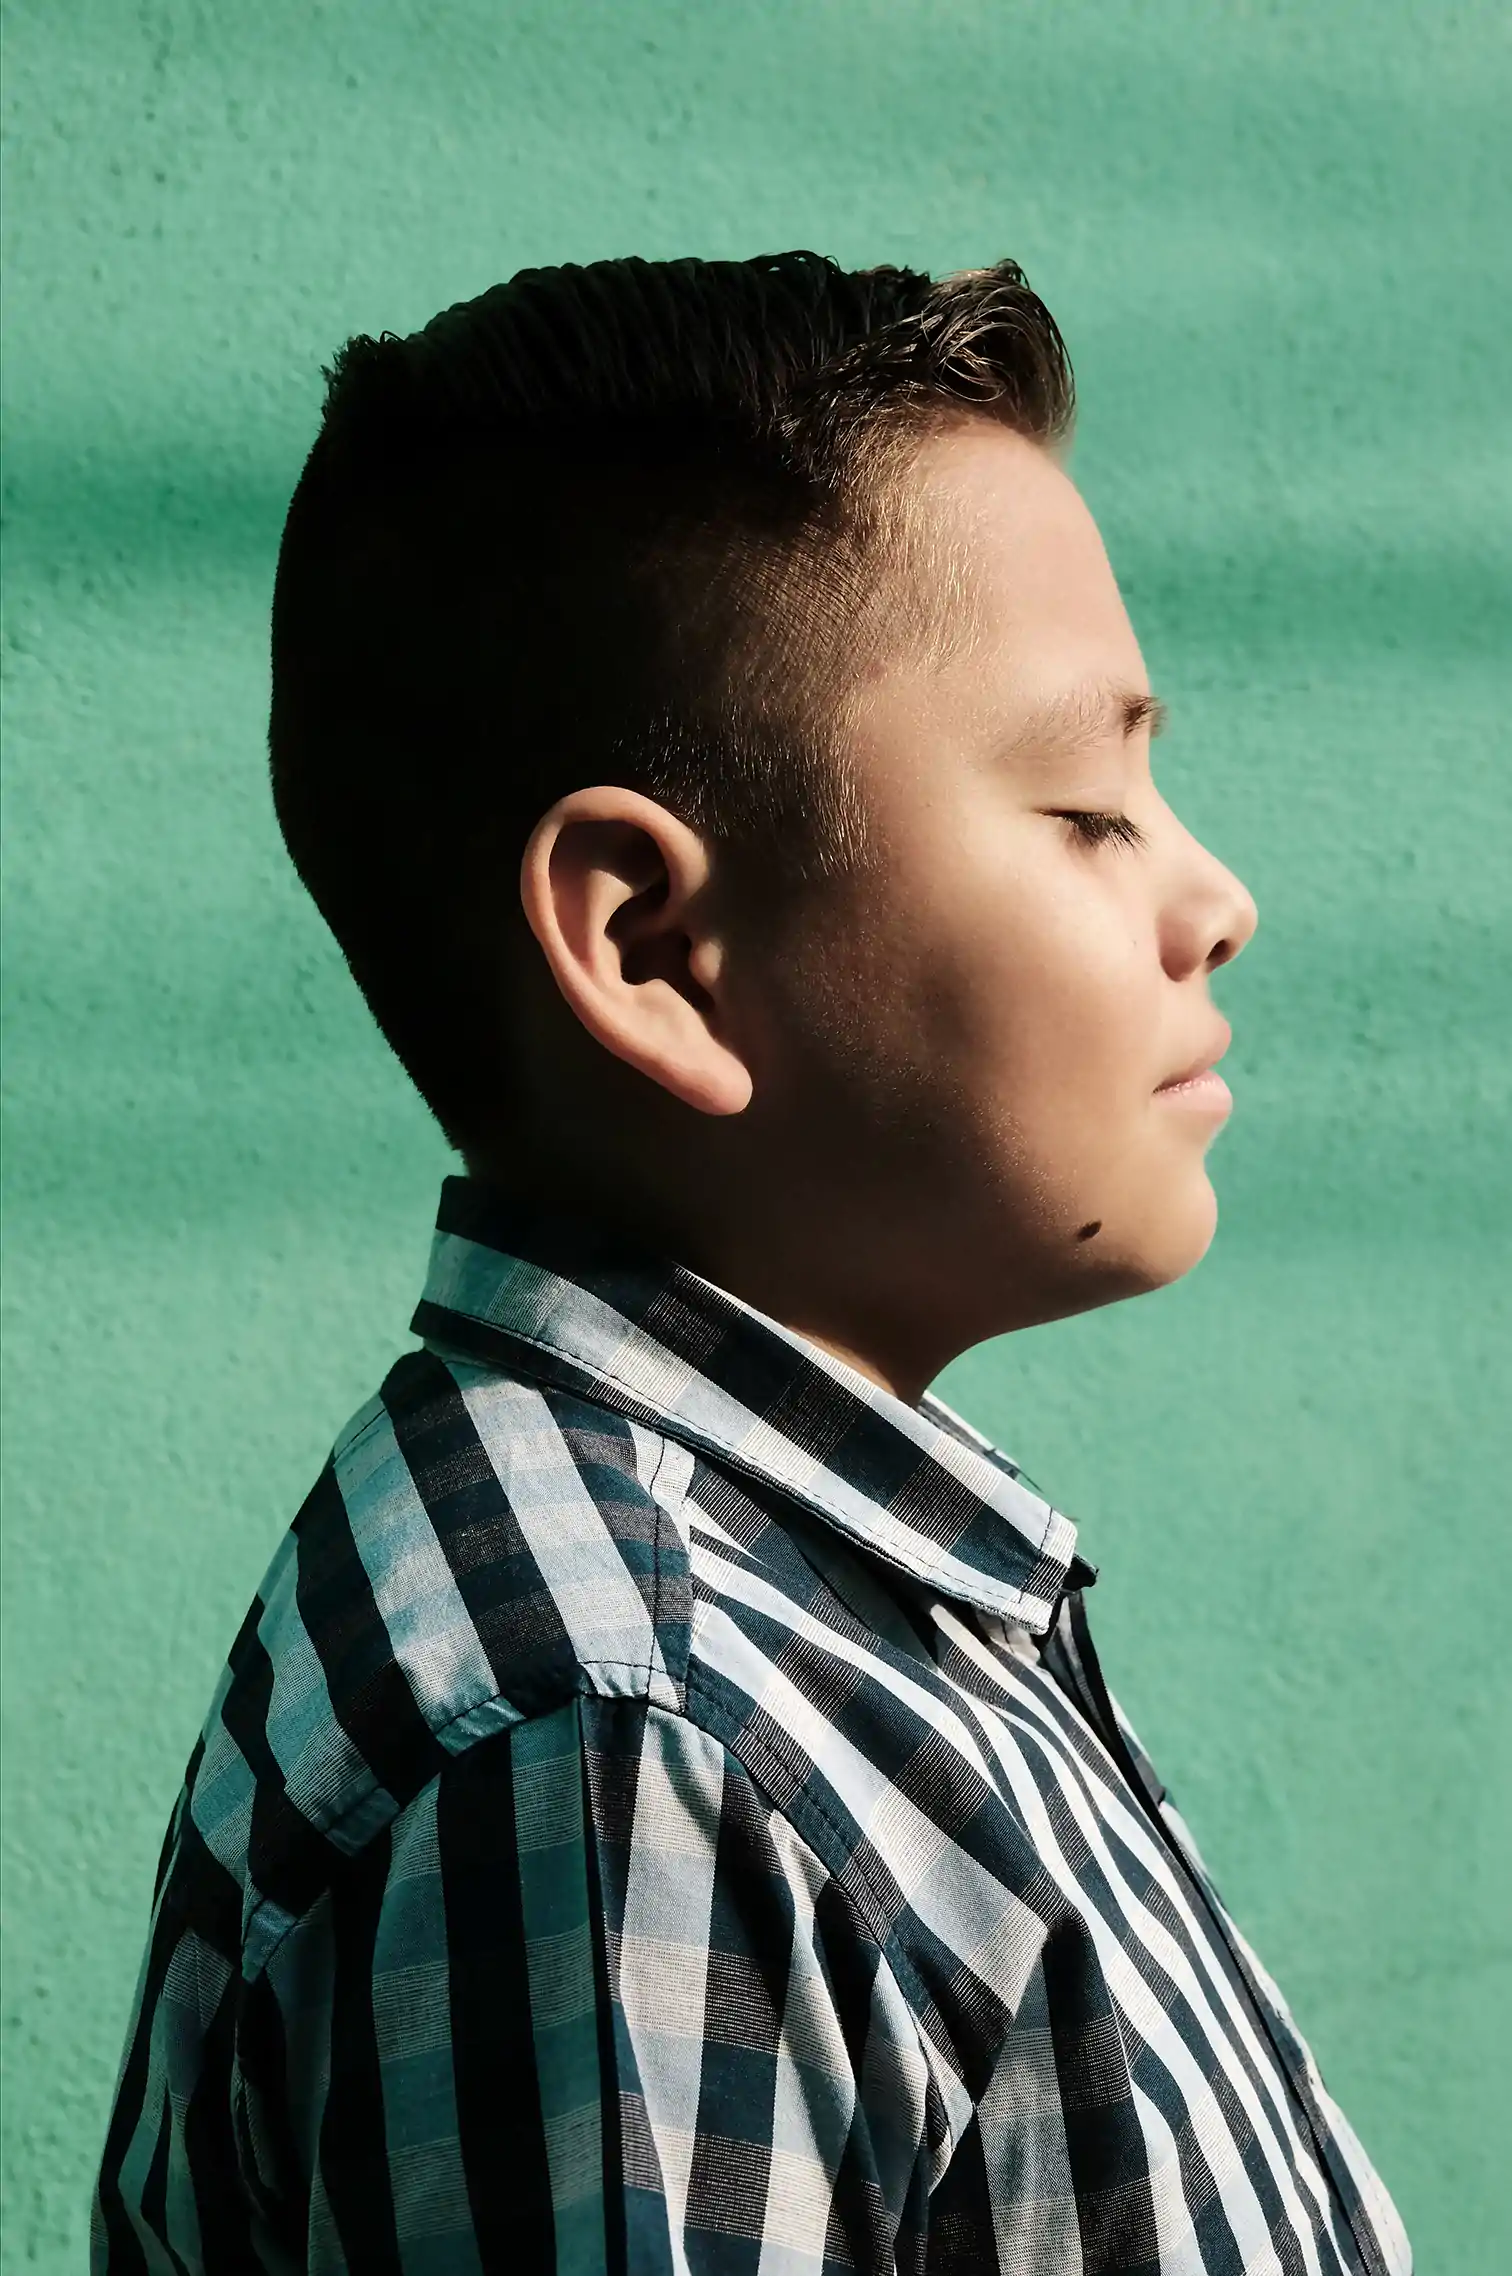 Contemporary social mexican photography. Shuster inhabitant from Iztapalapa in Mexico City. Boy on profil, beautiful light